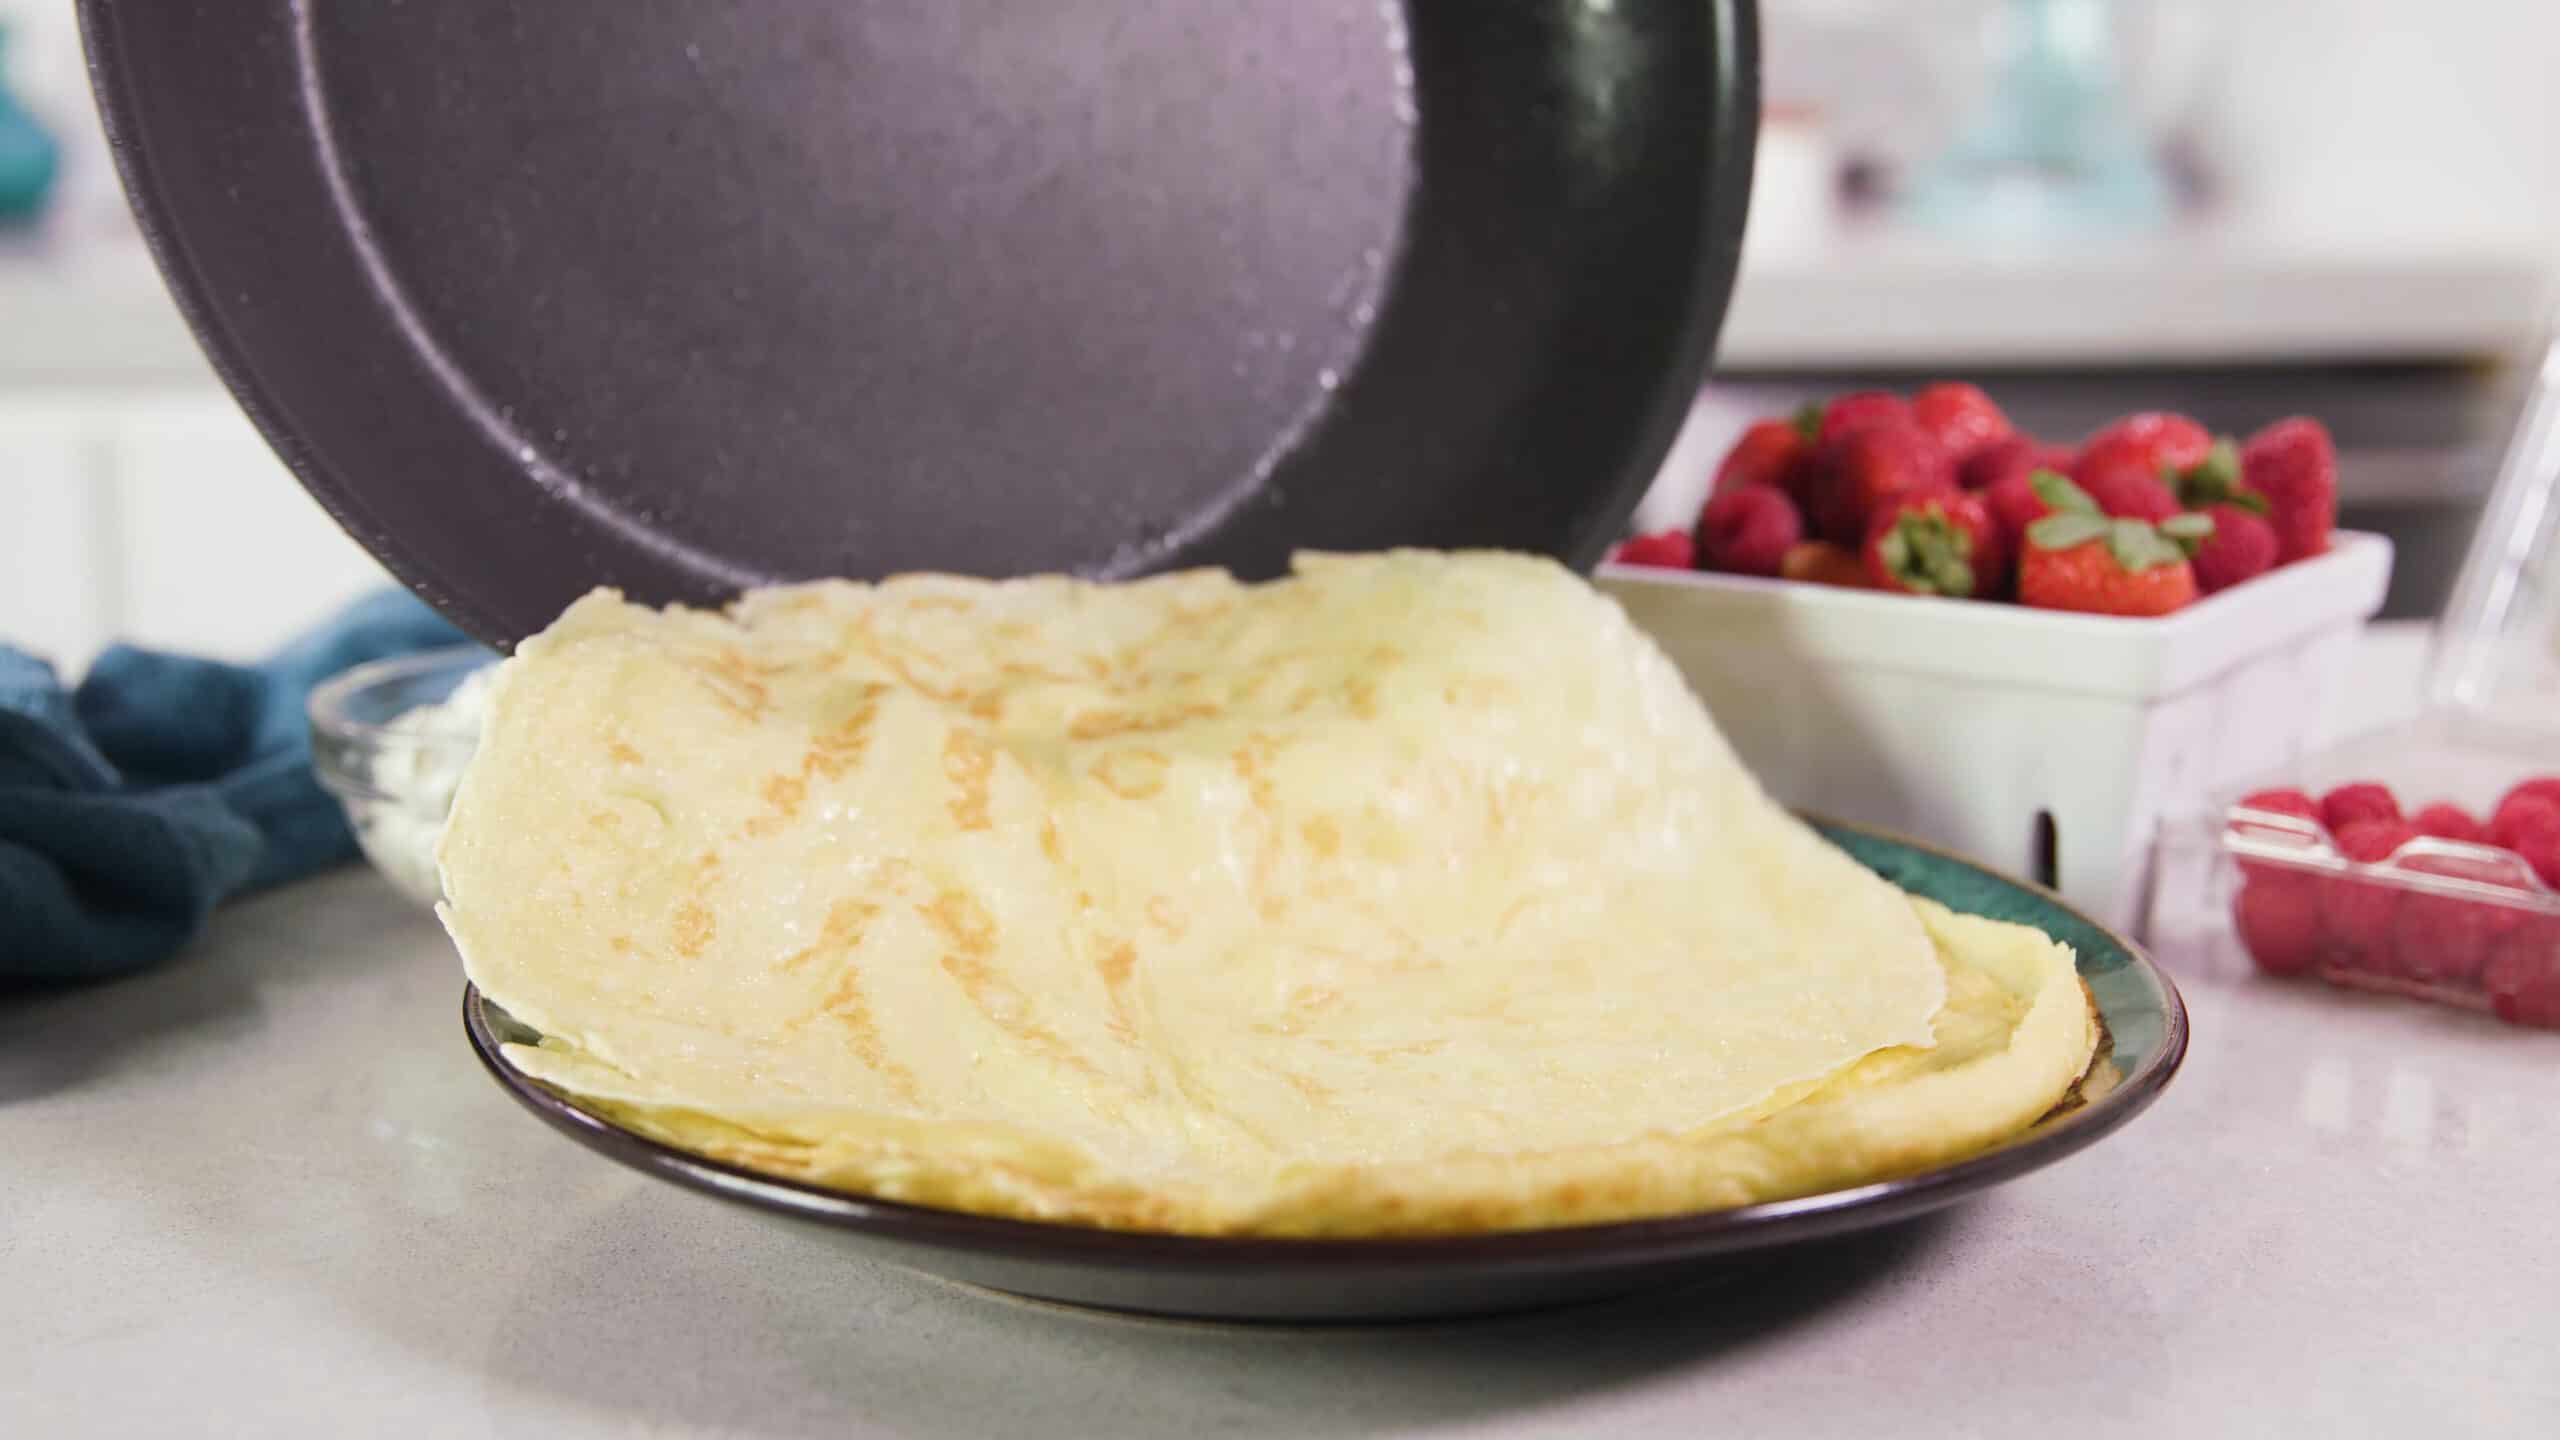 Angled view of a ceramic green and brown plate holding warm crepes with a freshly cooked crepe sliding on from a metal non-stick pan.